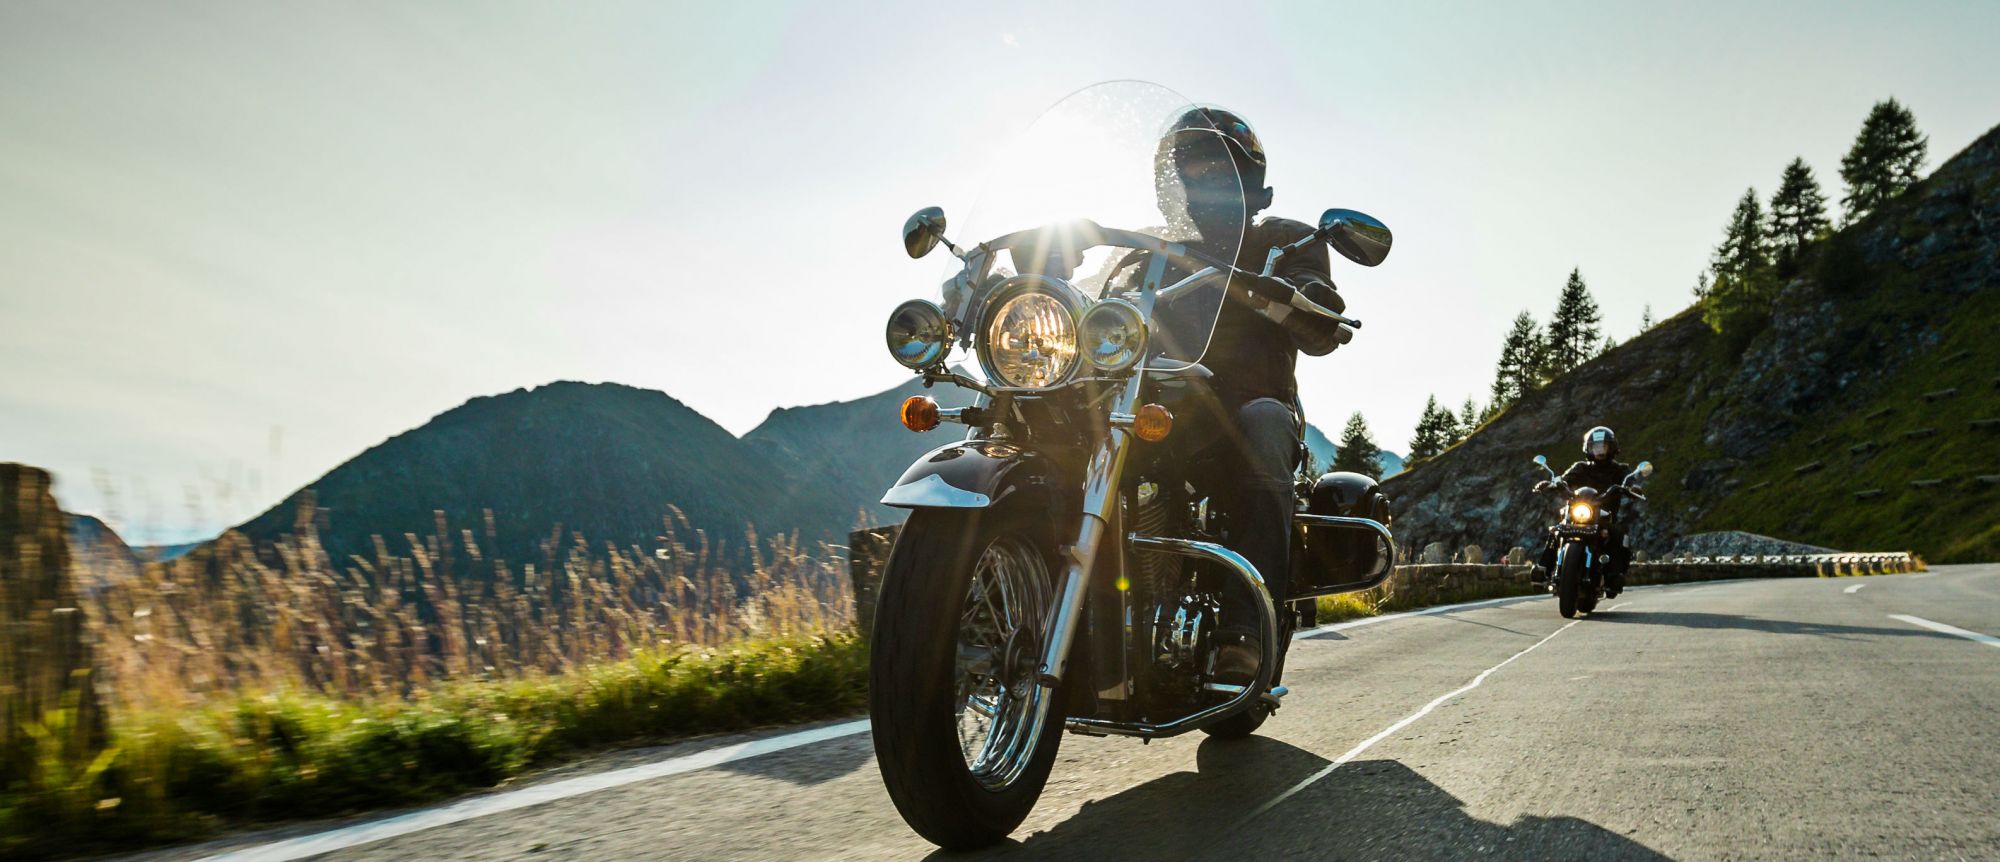 Motorcycle Insurance-Statesville, Hickory, Lenoir, NC